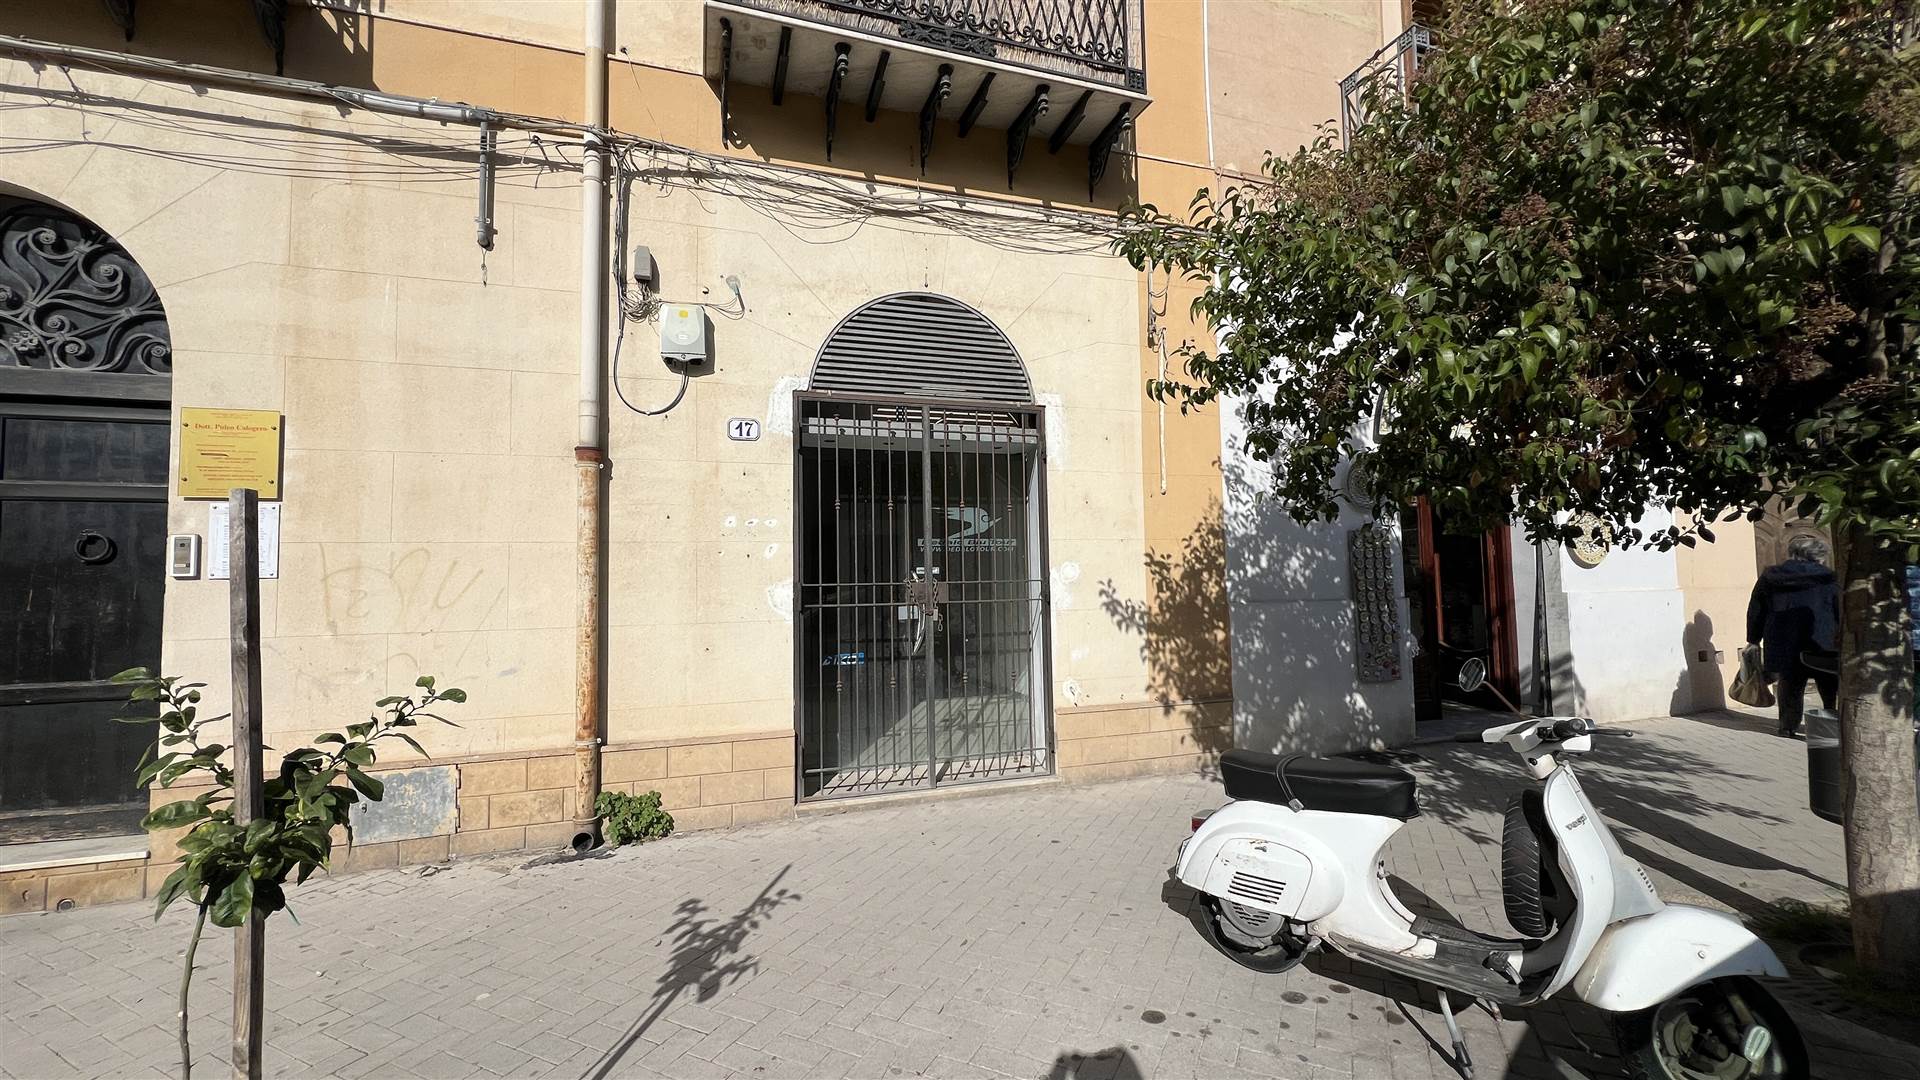 SCIACCA, Commercial property for sale of 50 Sq. mt., Energetic class: G, placed at Ground, composed by: , 1 Bathroom, Price: € 150,000